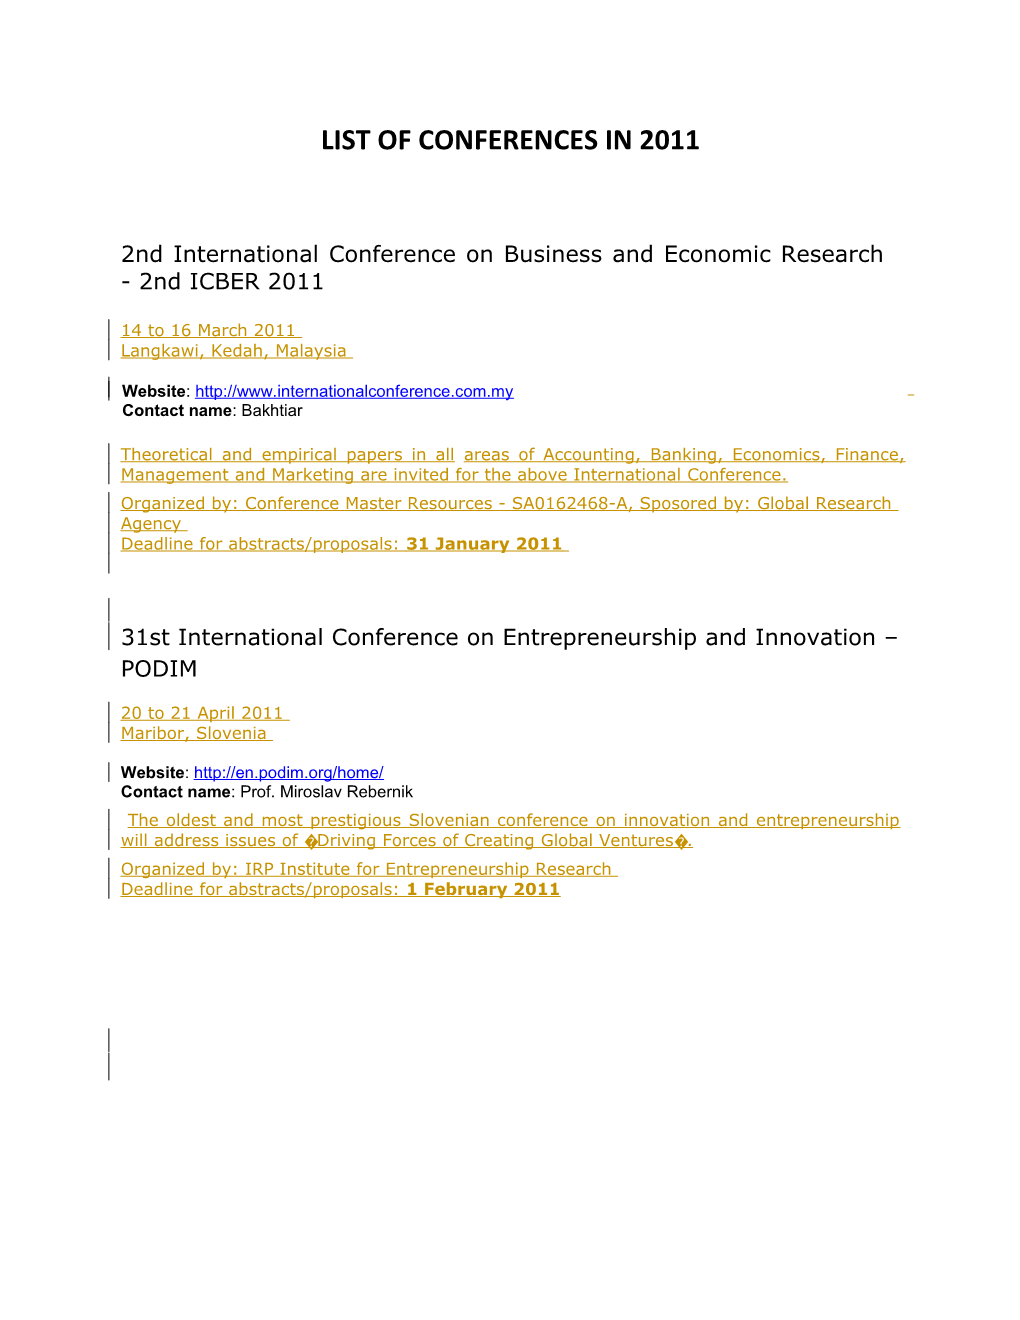 List of Conferences in 2011